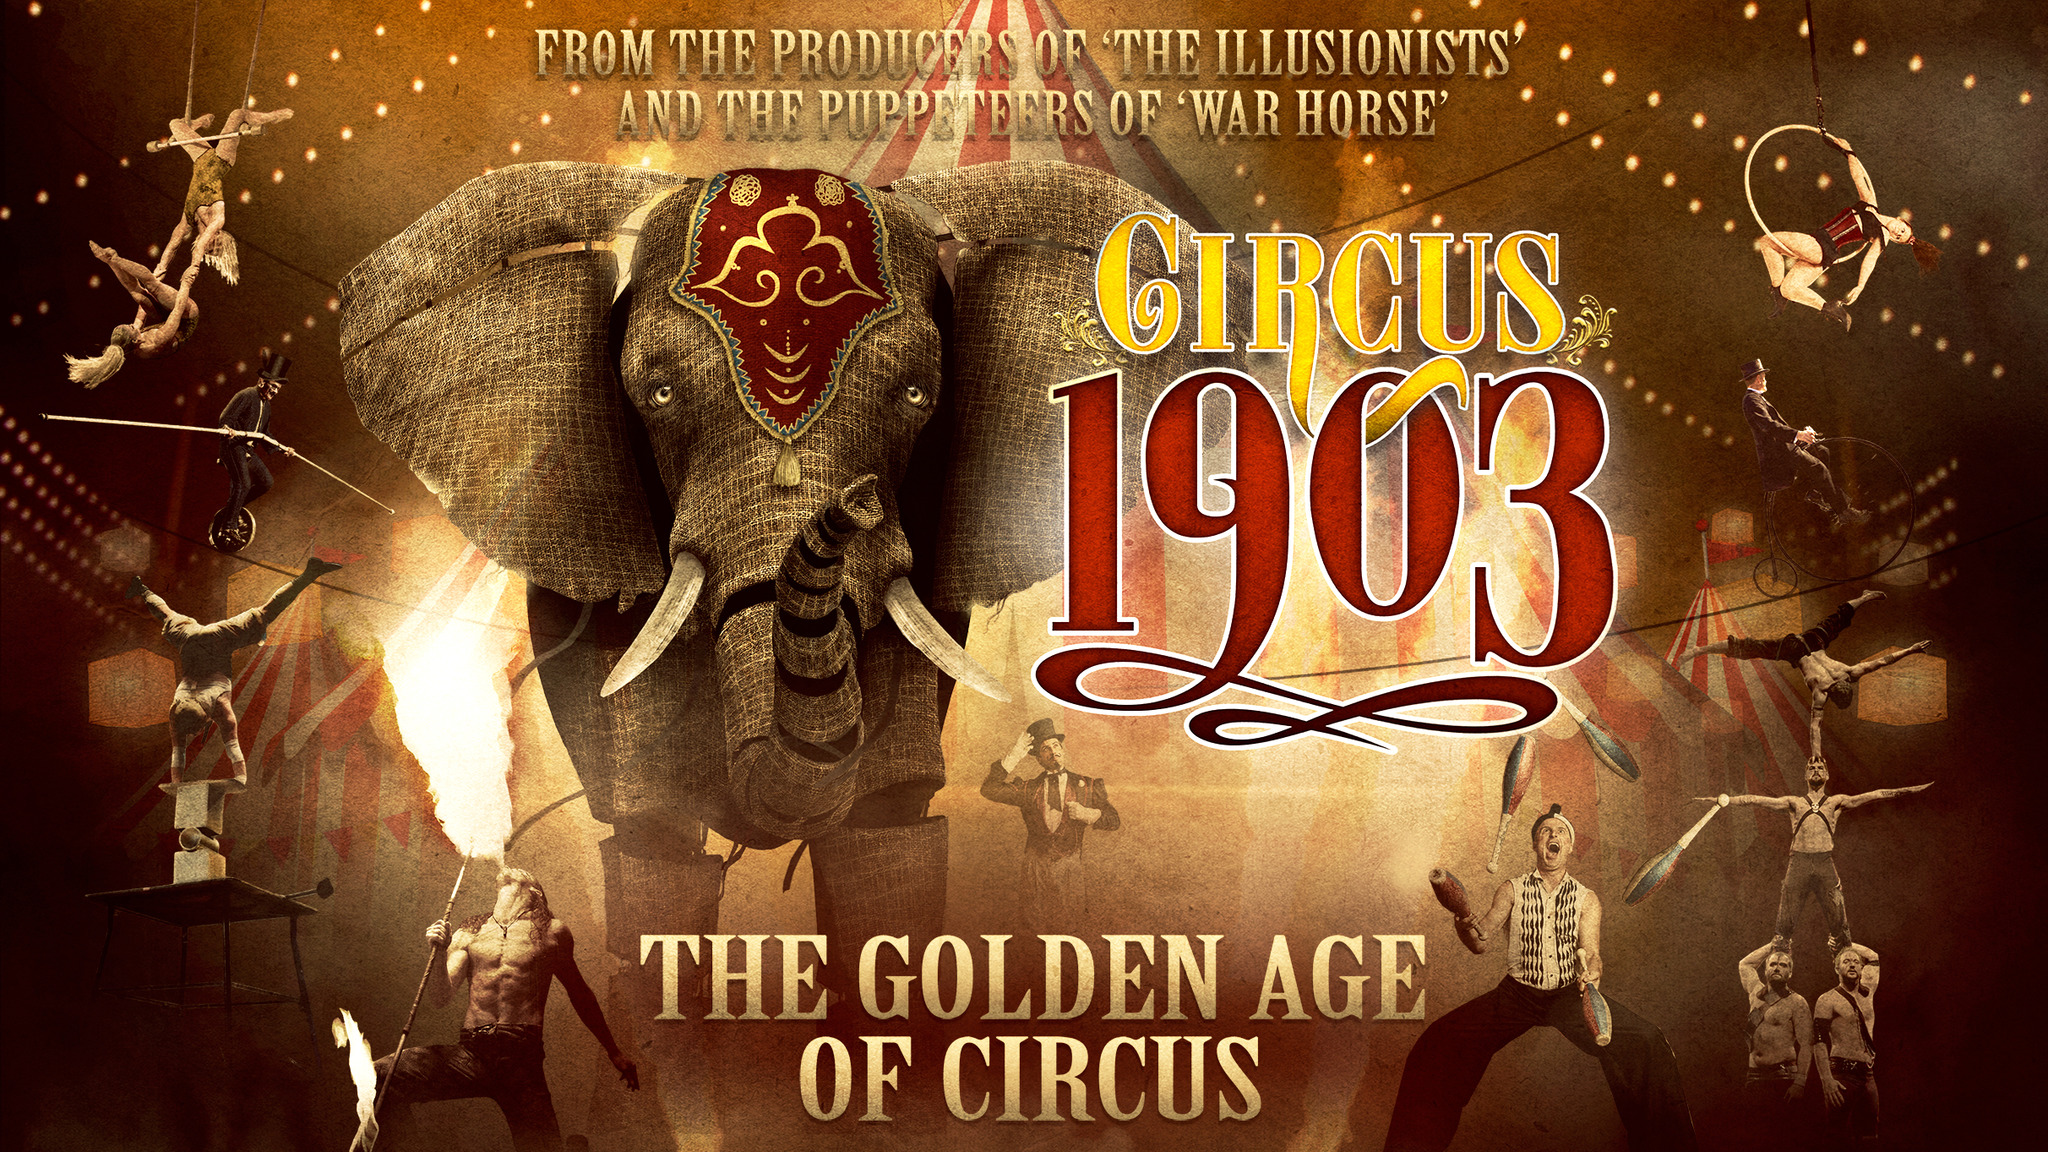 CIRCUS 1903 The Golden Age of Circus (Chicago) Tickets Event Dates